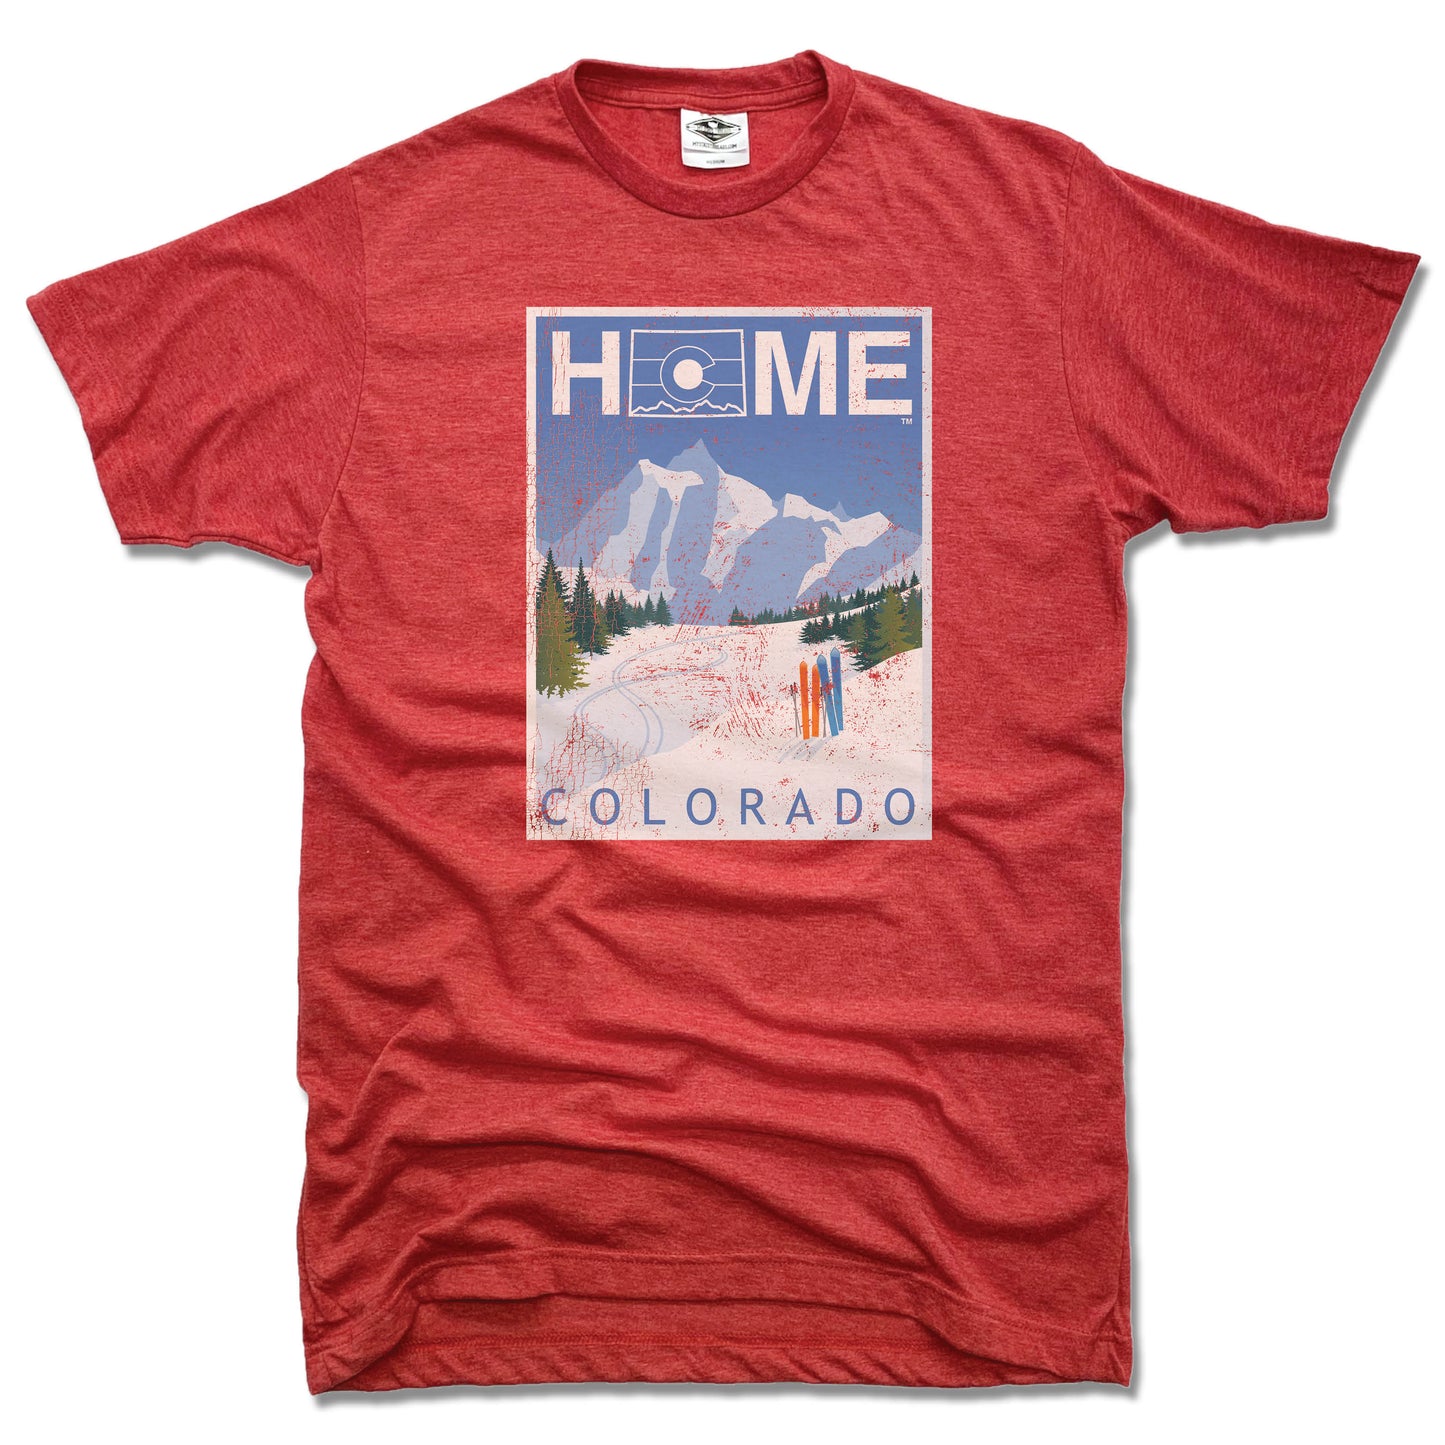 COLORADO RED TEE | HOME | POSTER